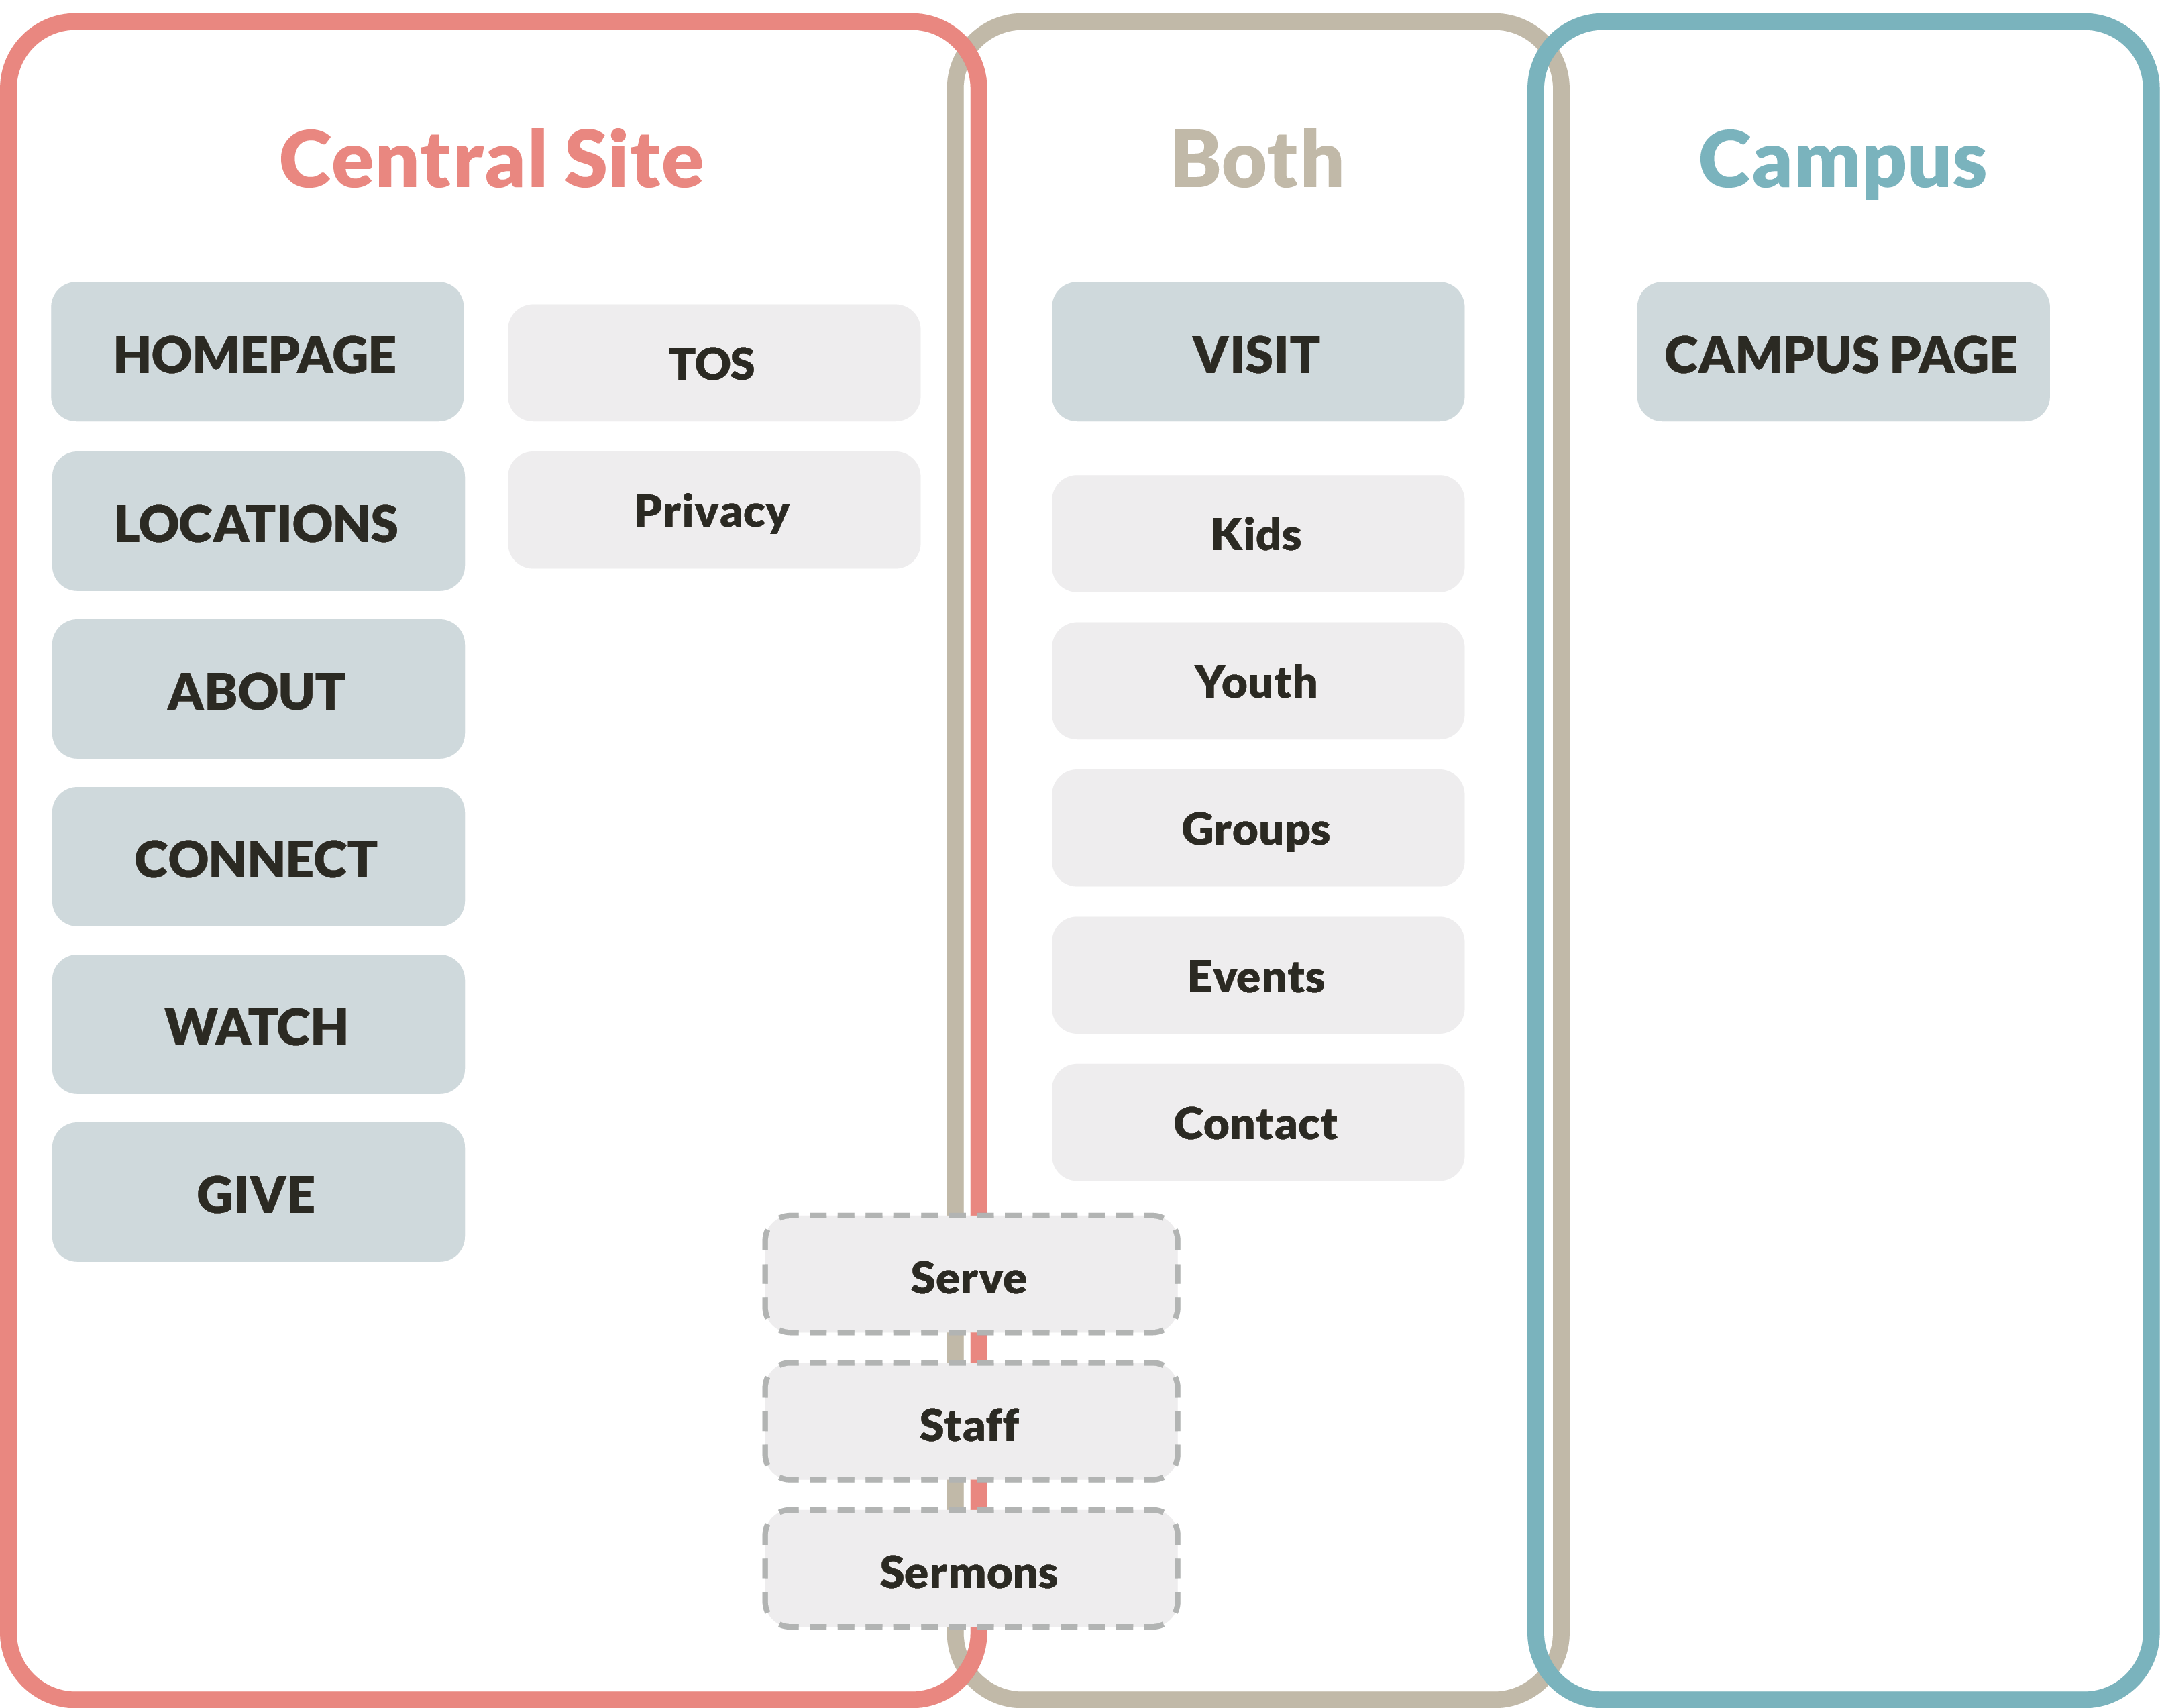 Campus and Subpages